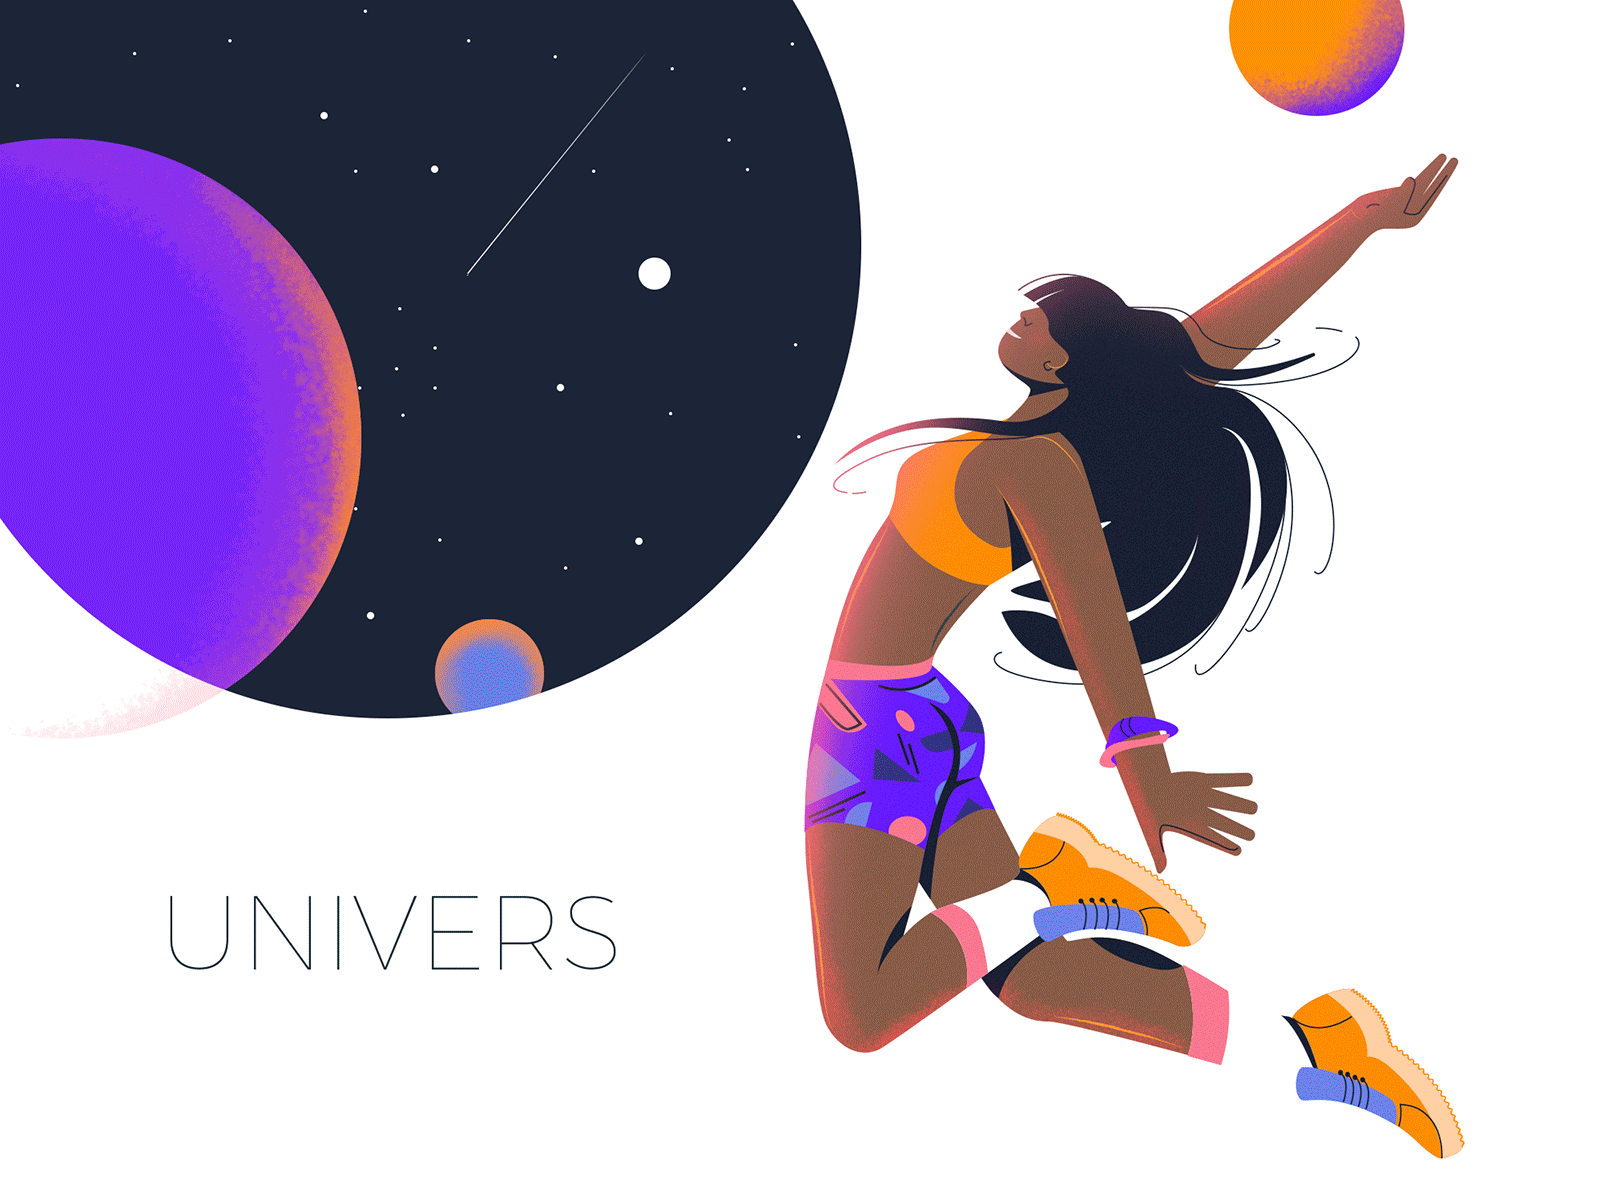 UNIVERS art character coloful colorful creative design dream illustration inspiration love motion motion design people planet sport universe vector woman